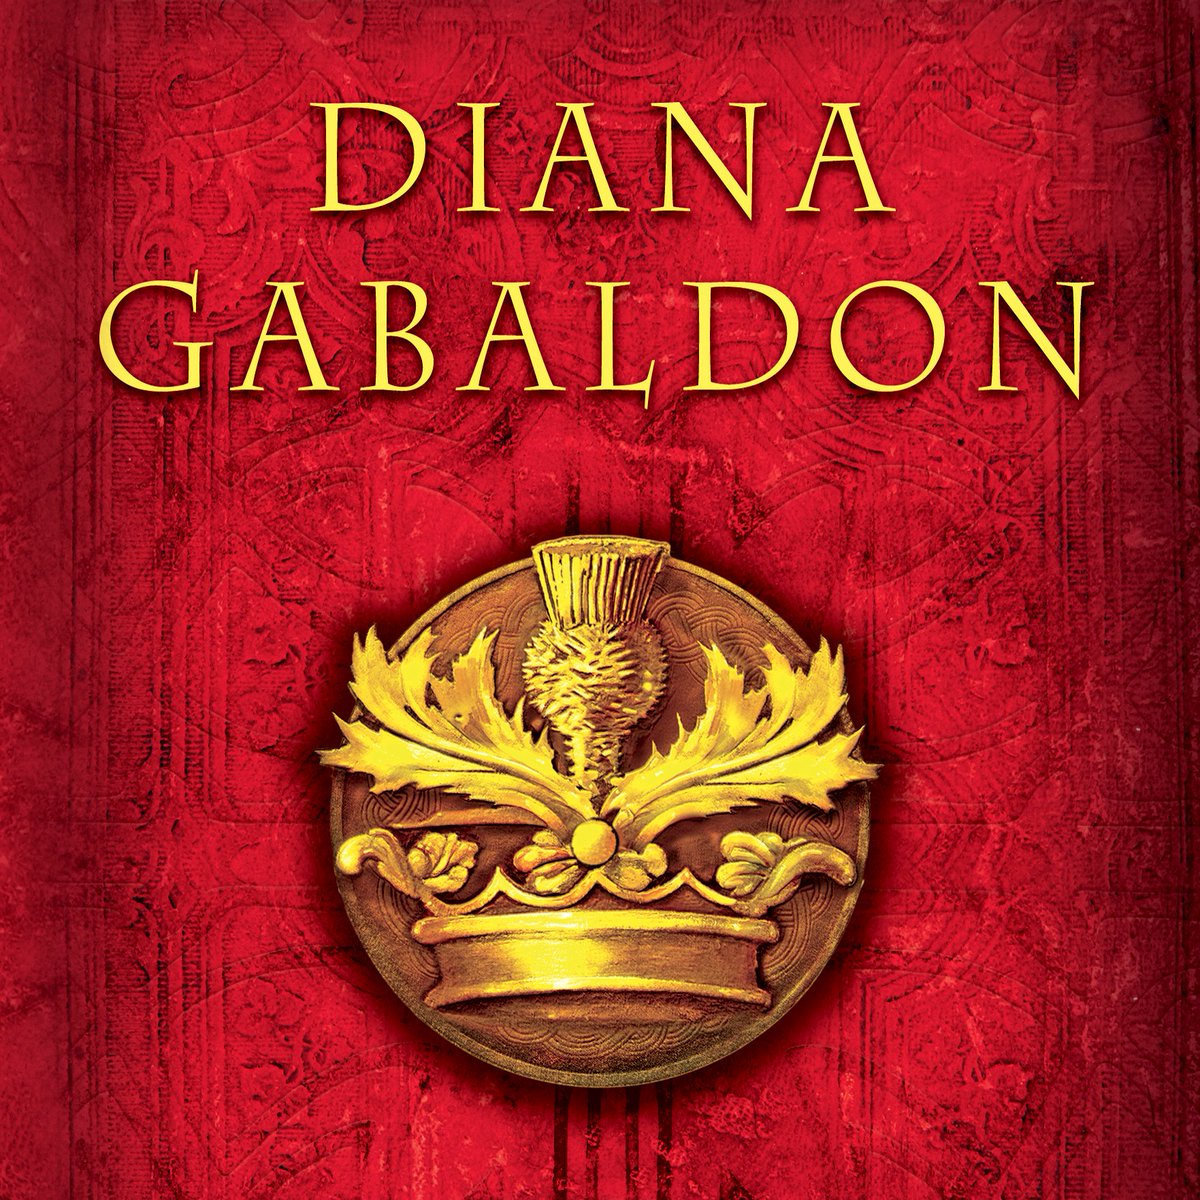 THIS MONTH IN THE OUTLANDER UNIVERSE

April 1757

Reference:
The #OUTLANDER Universe
by Diana Gabaldon #DianaGabaldon
dianagabaldon.com/wordpress/book…